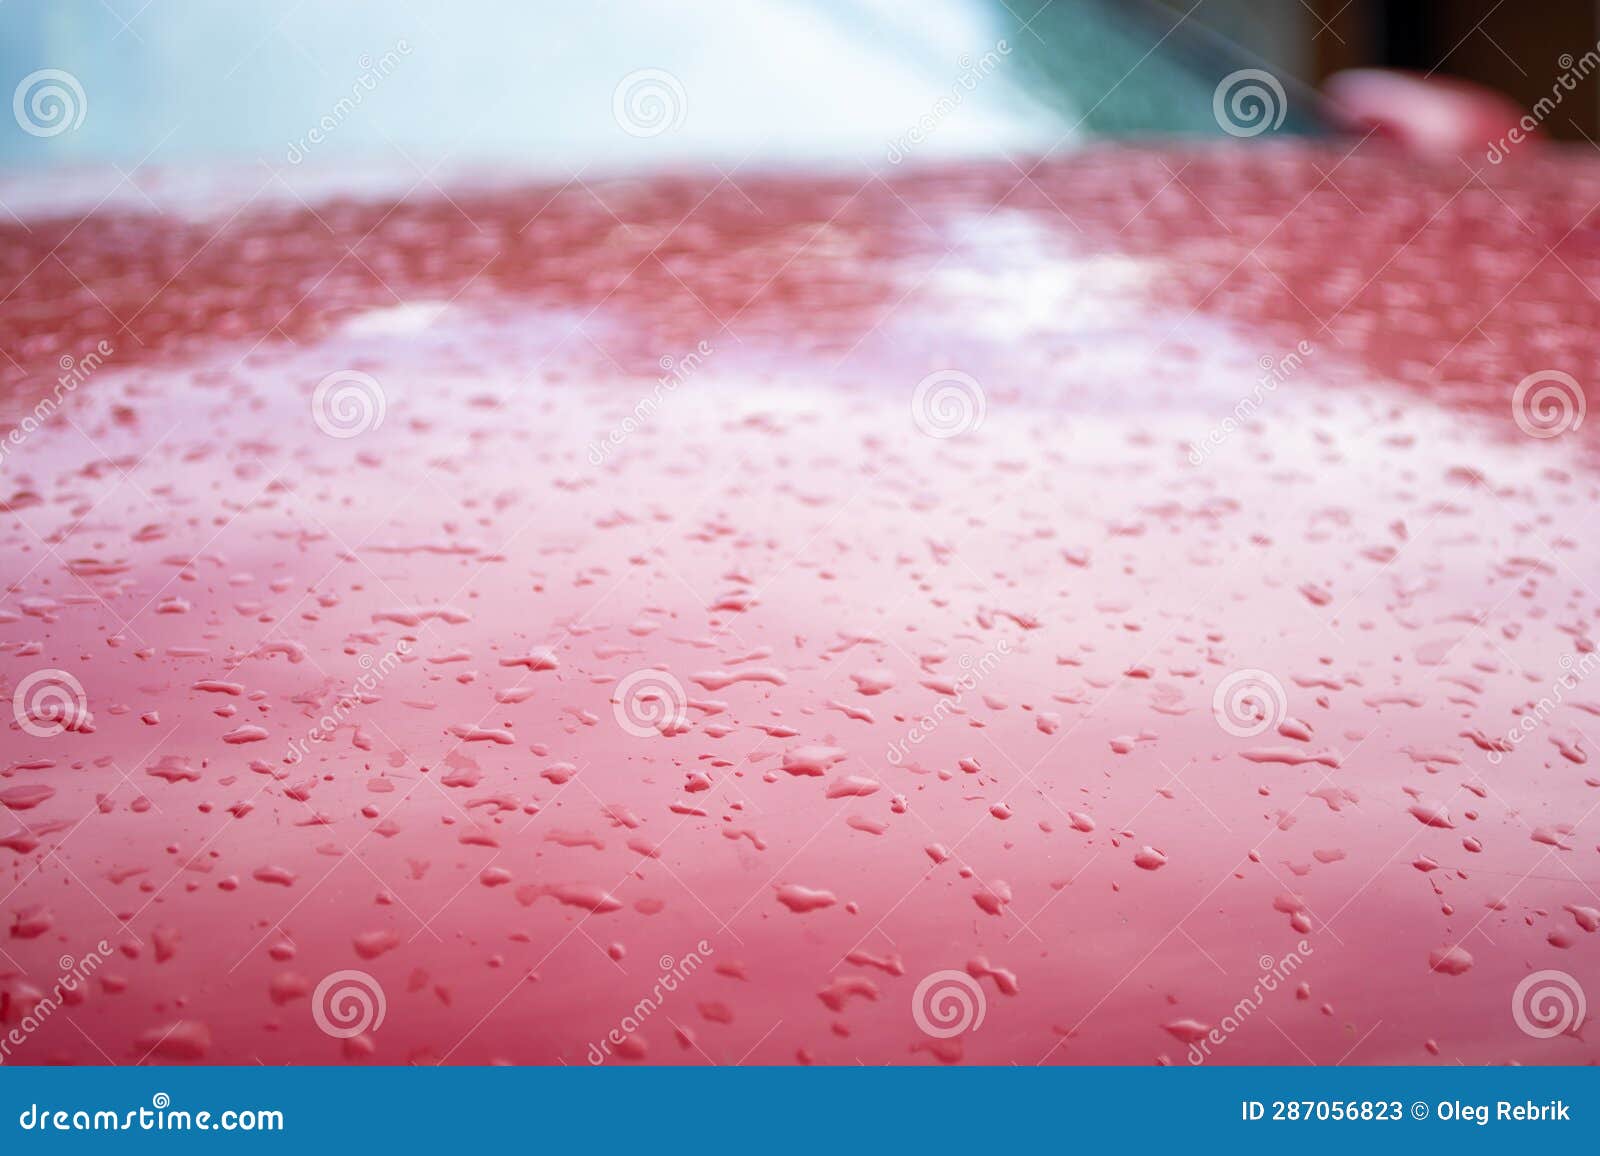 water drops on red car, shallow depth of field, selective focus